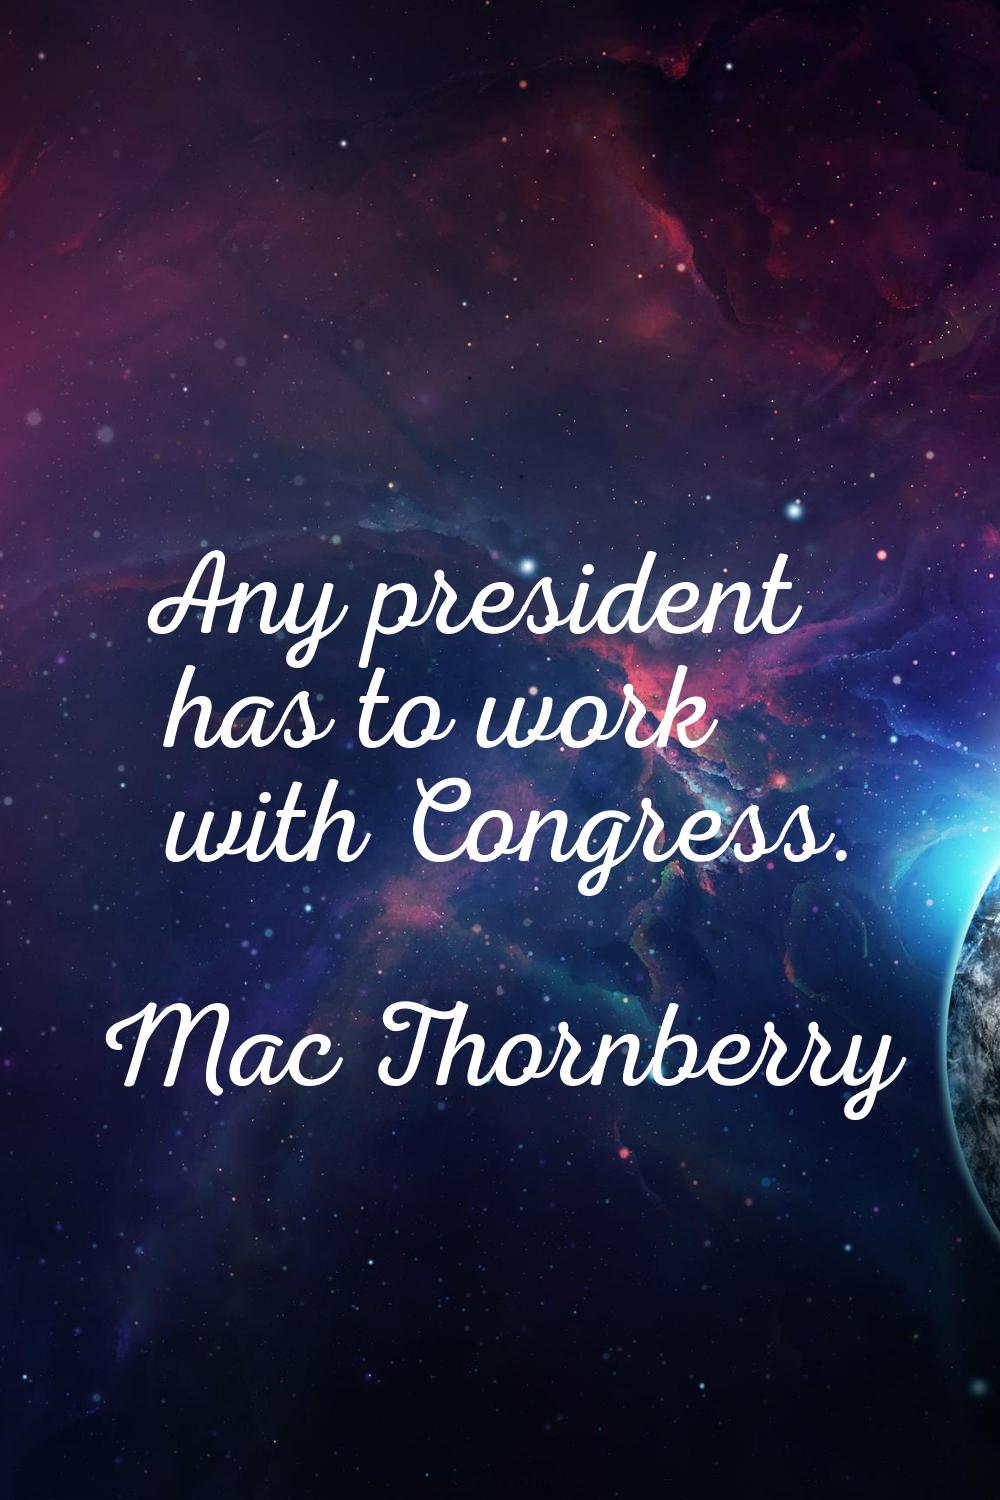 Any president has to work with Congress.